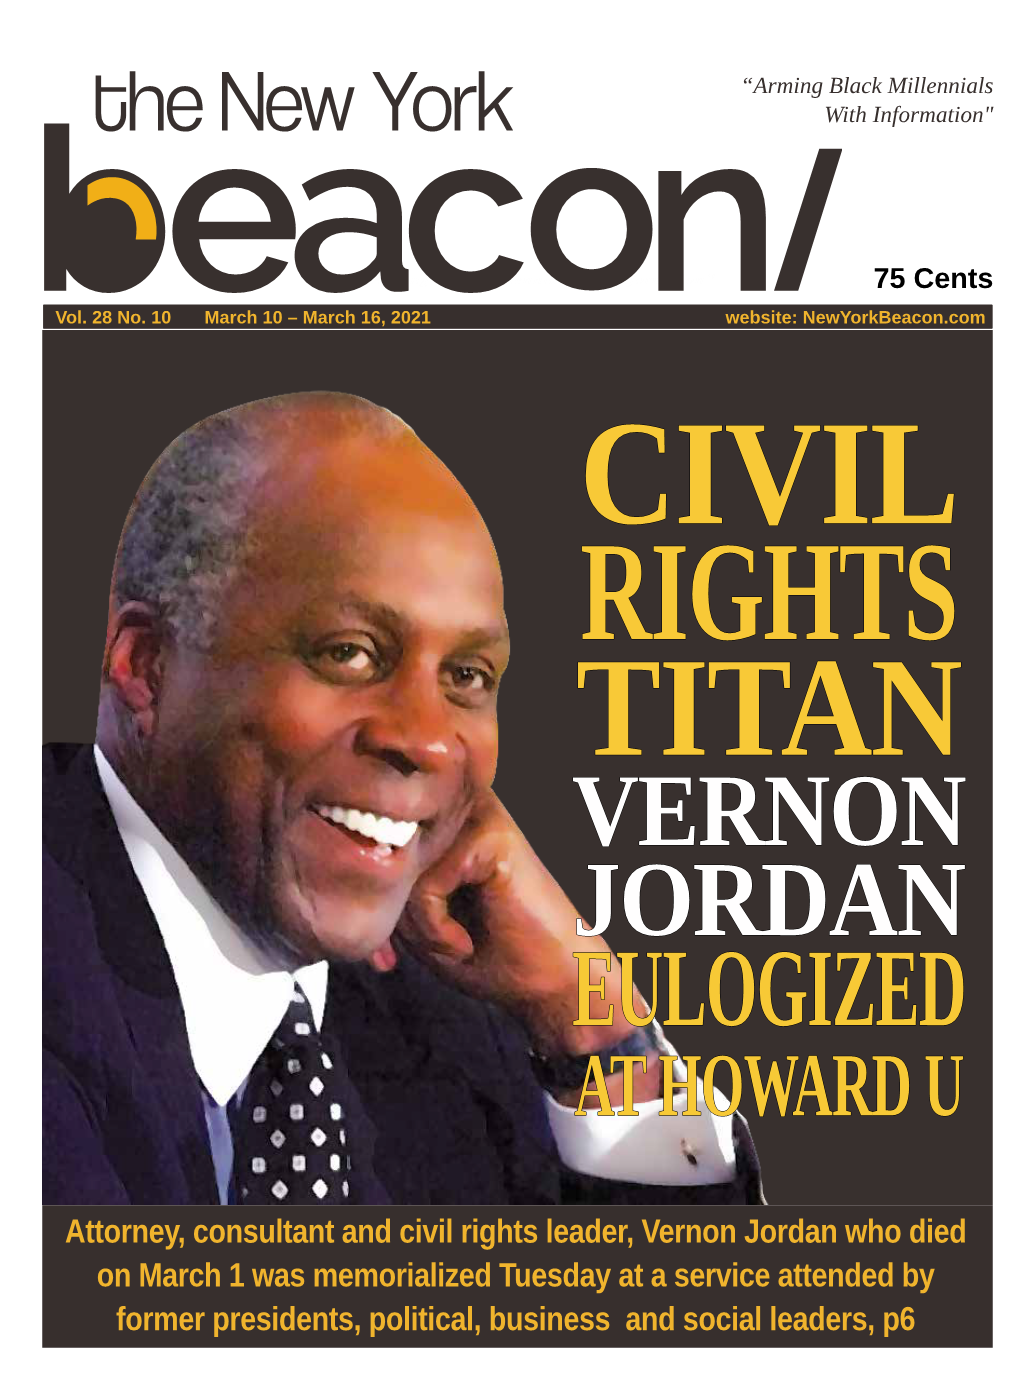 Attorney, Consultant and Civil Rights Leader, Vernon Jordan Who Died On